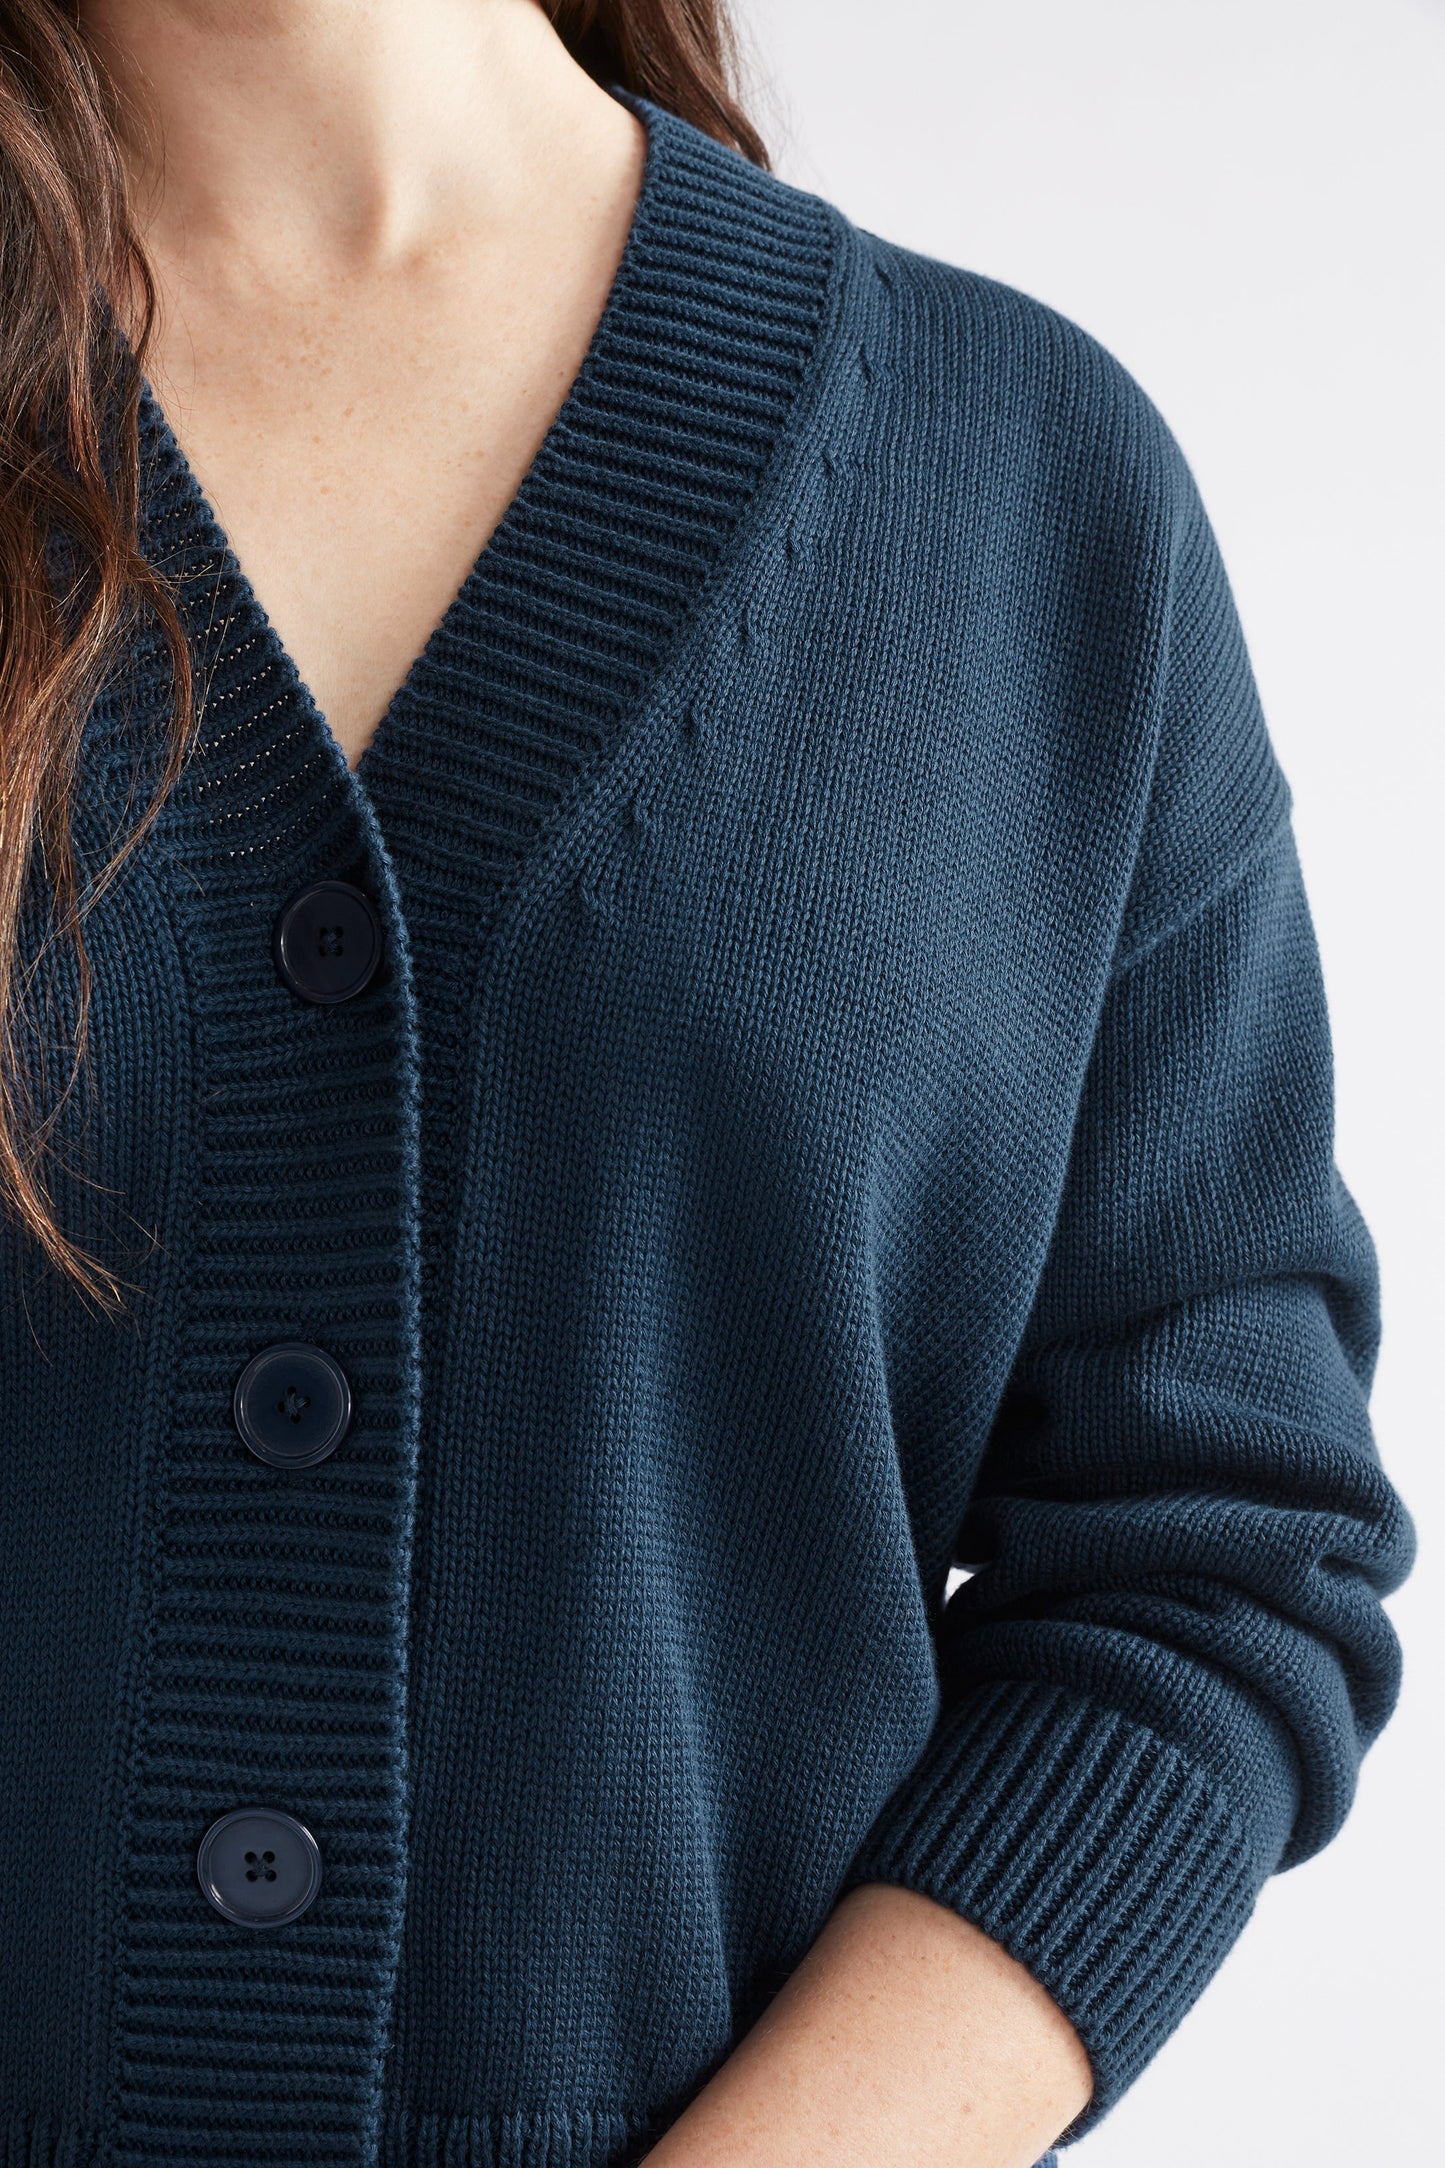 Willow Organic Cotton Everyday Knit Cardigan Model Front Detail | DEEP SEA BLUE